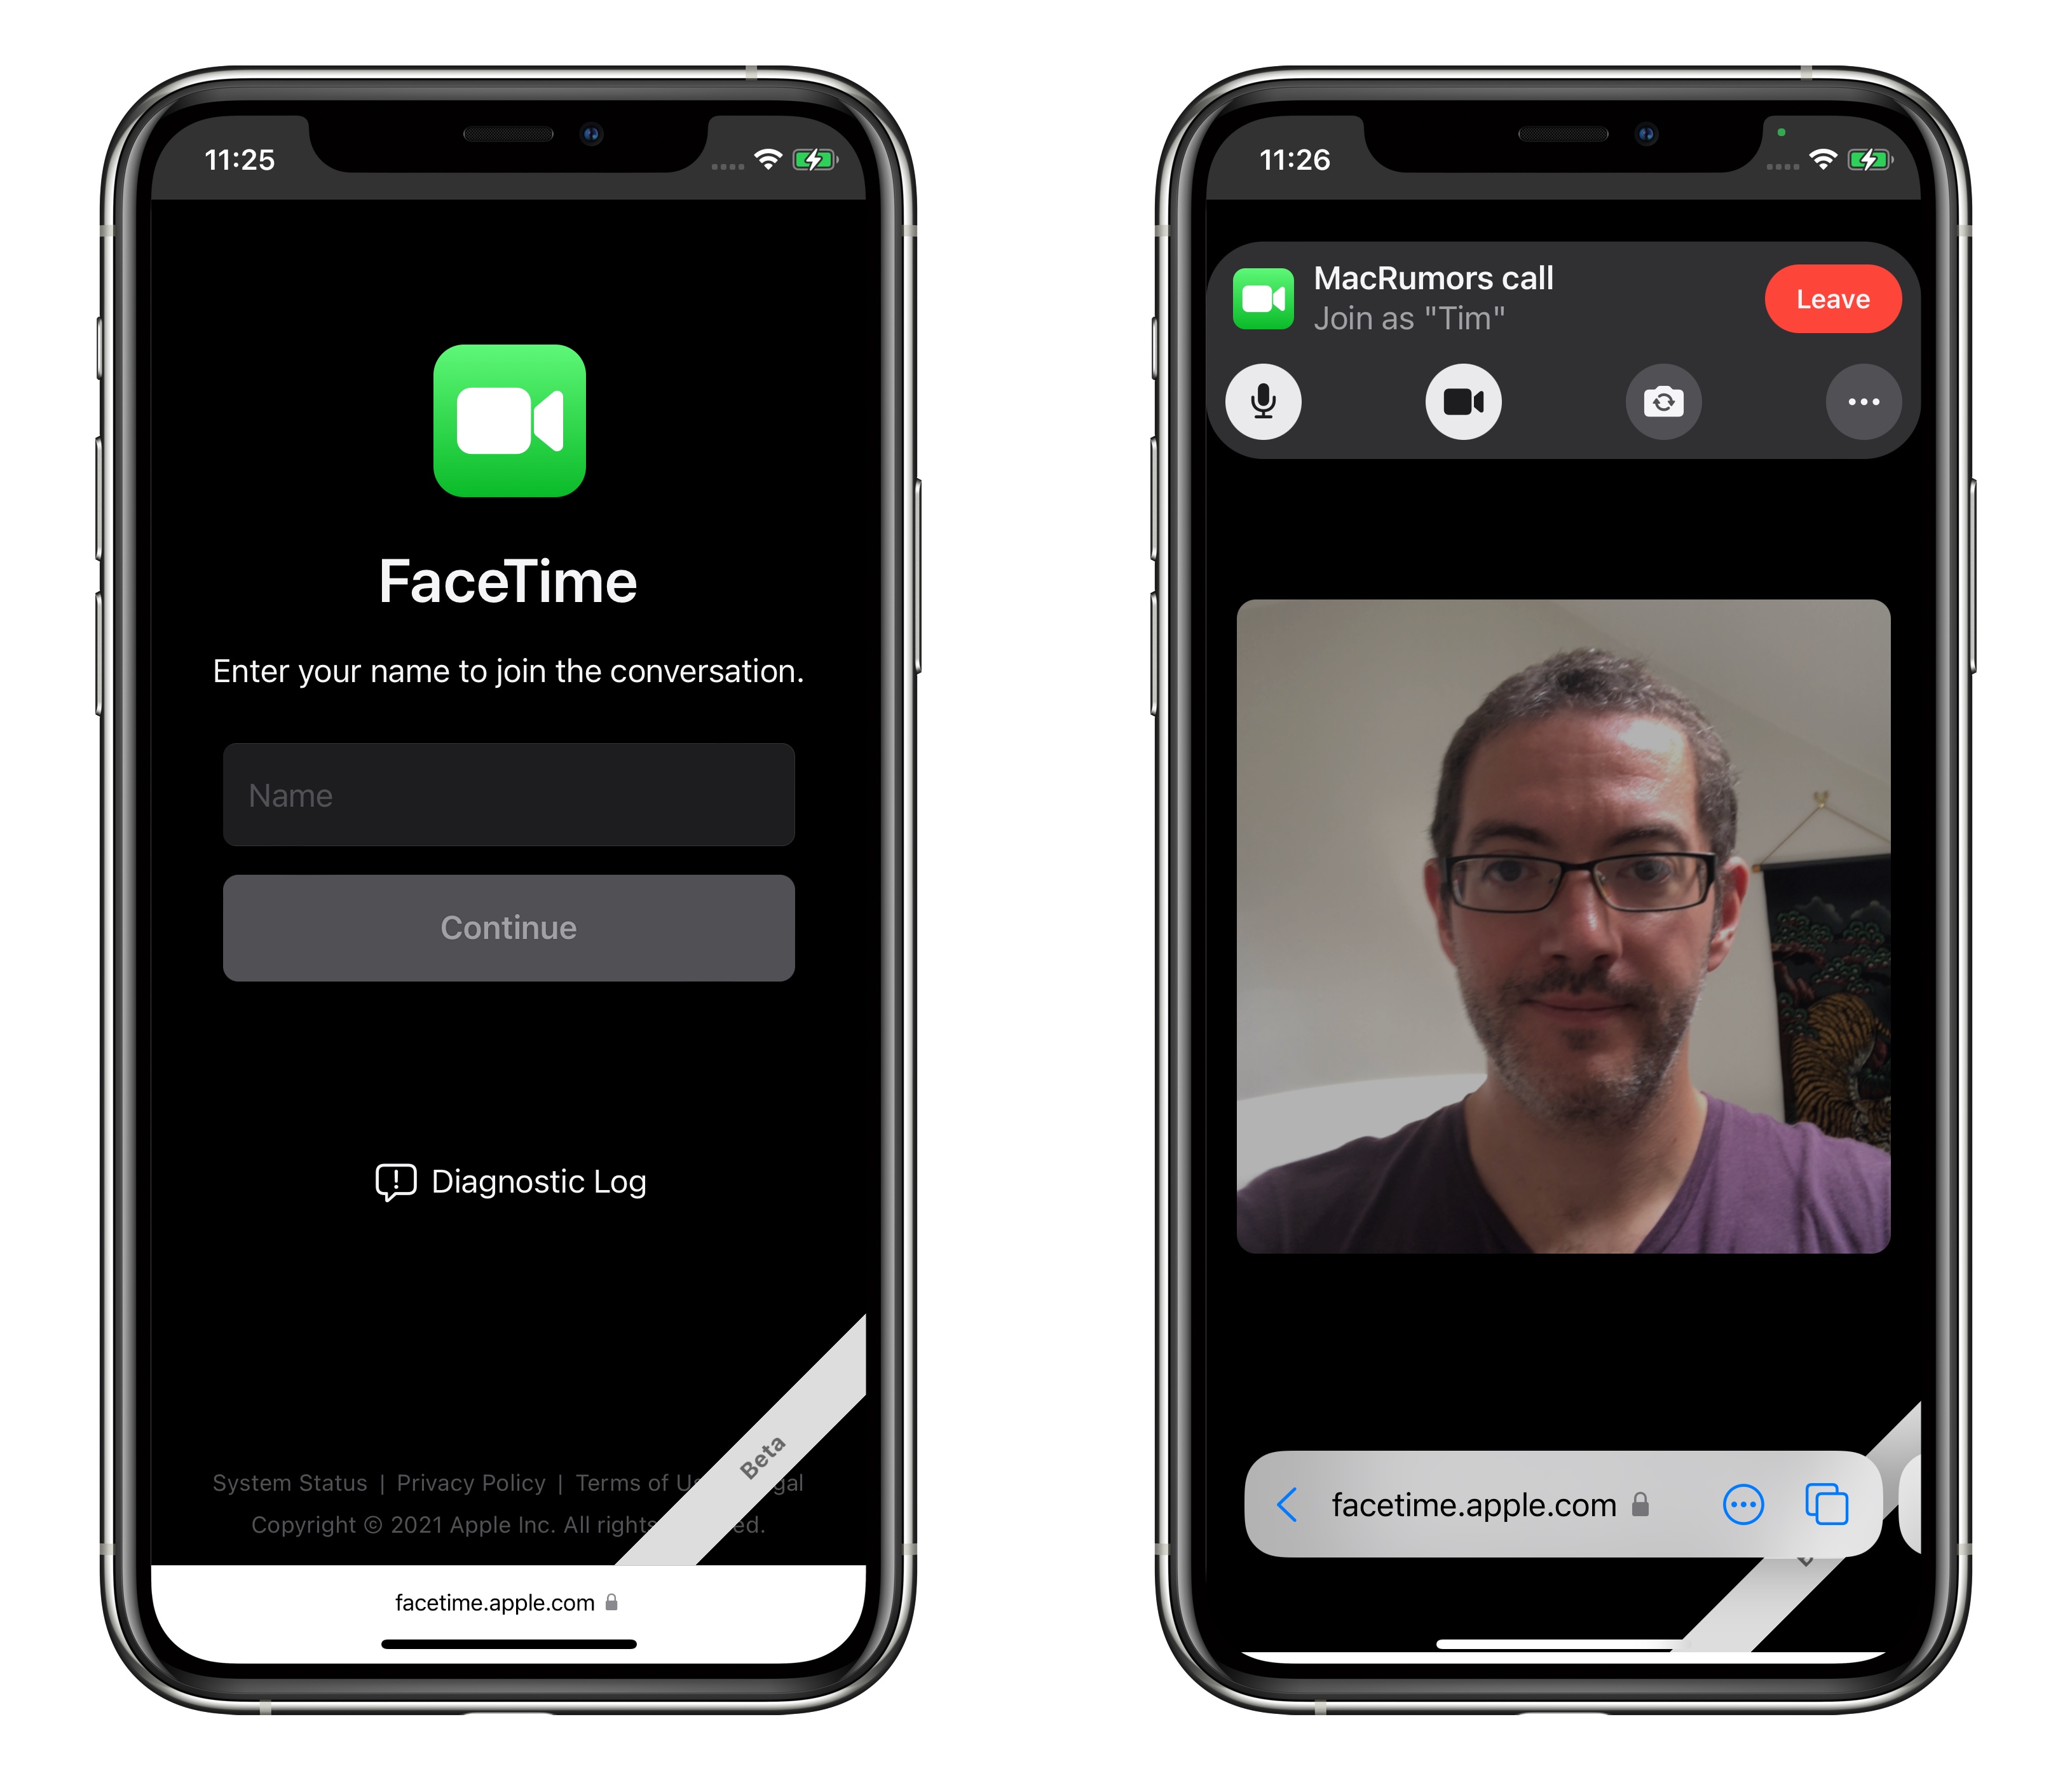 How to FaceTime on Android